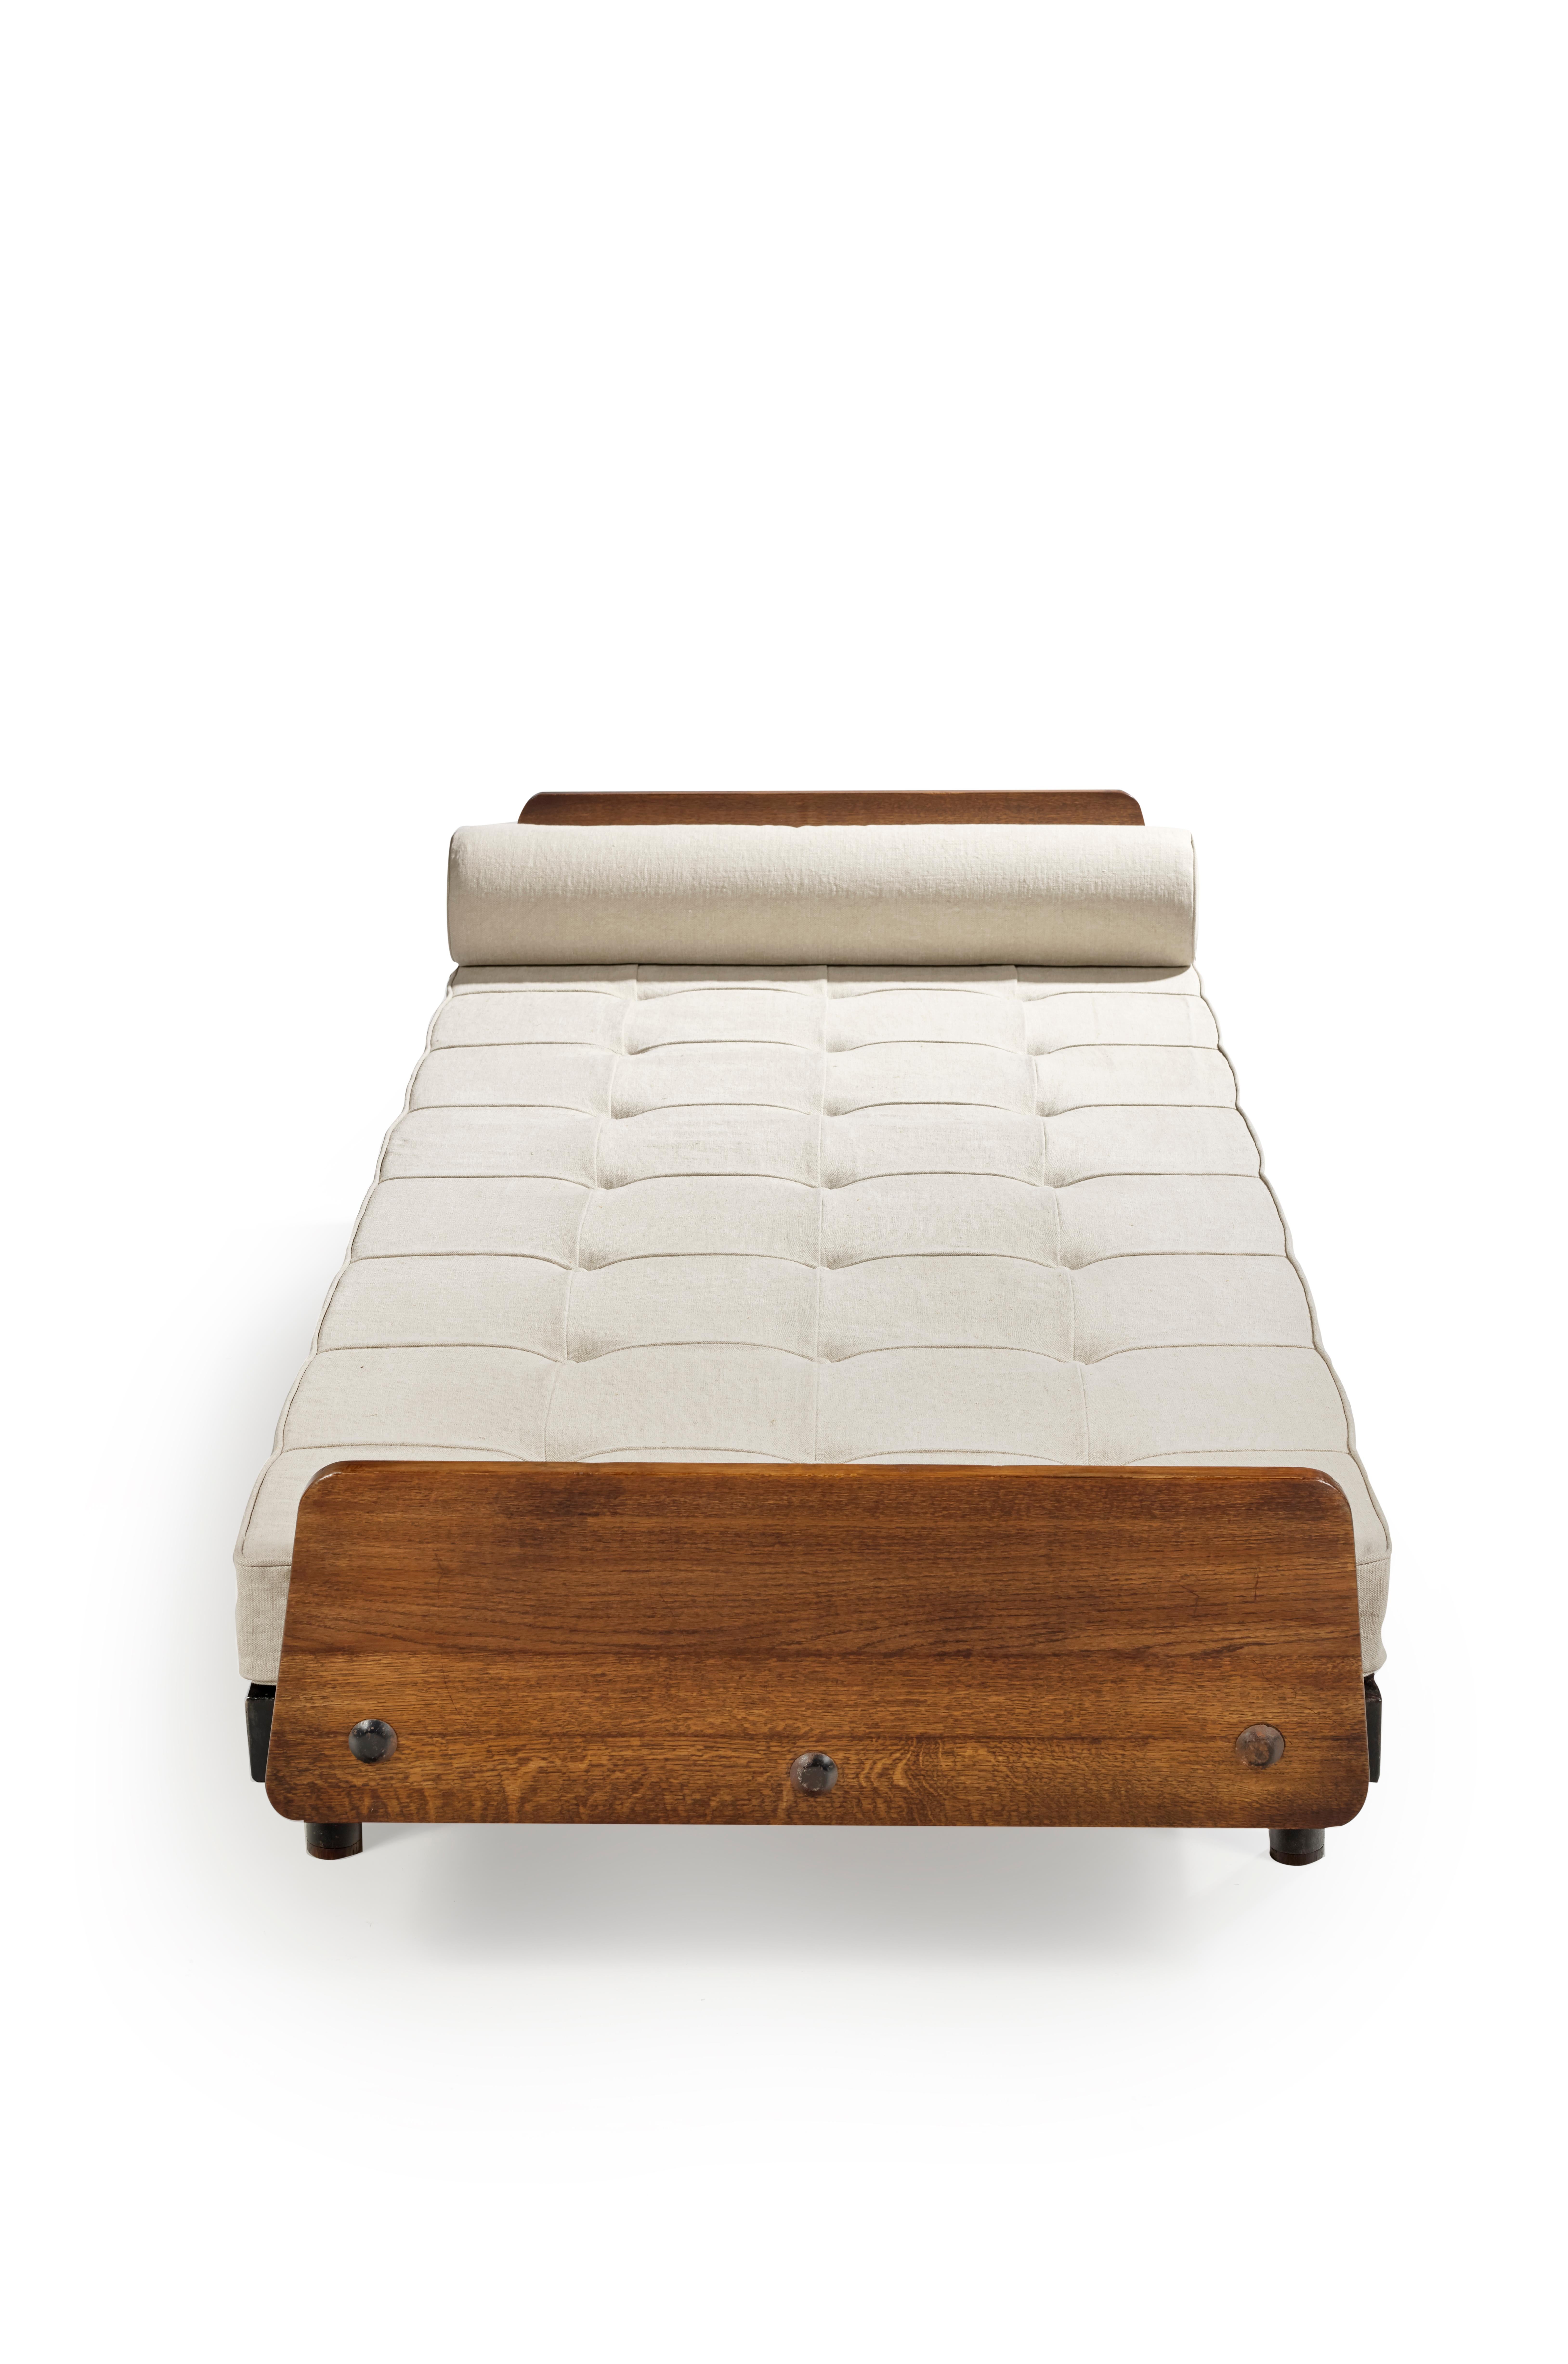 Mid-20th Century Jean Prouvé Bed Model SCAL 452, circa 1950